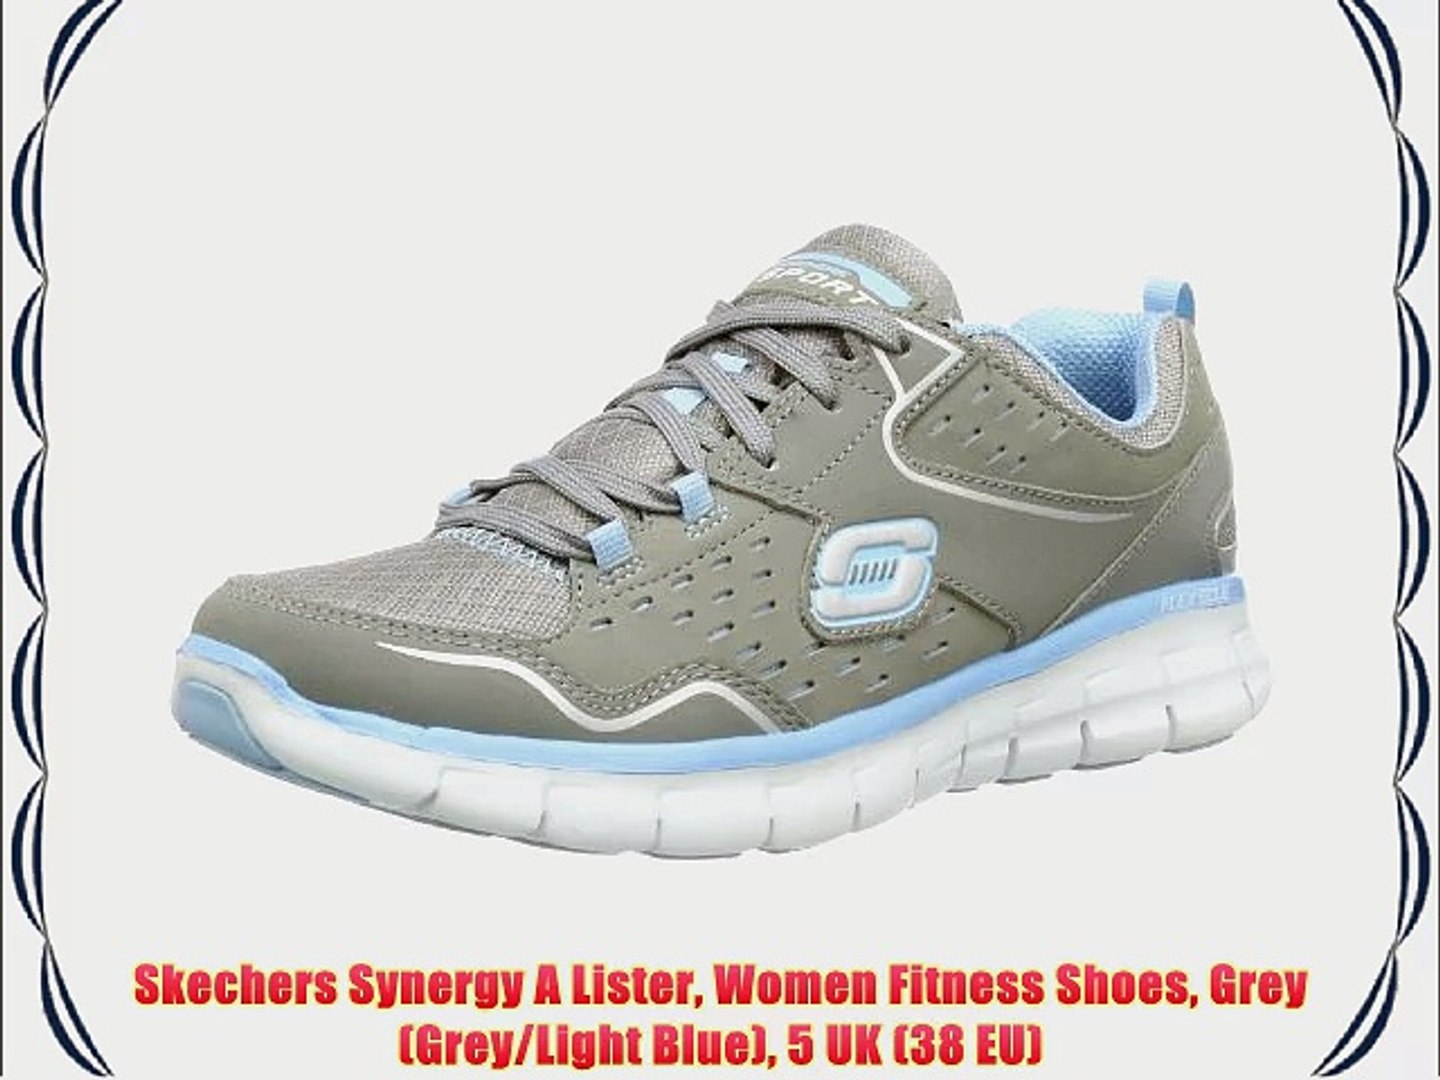 skechers synergy a lister